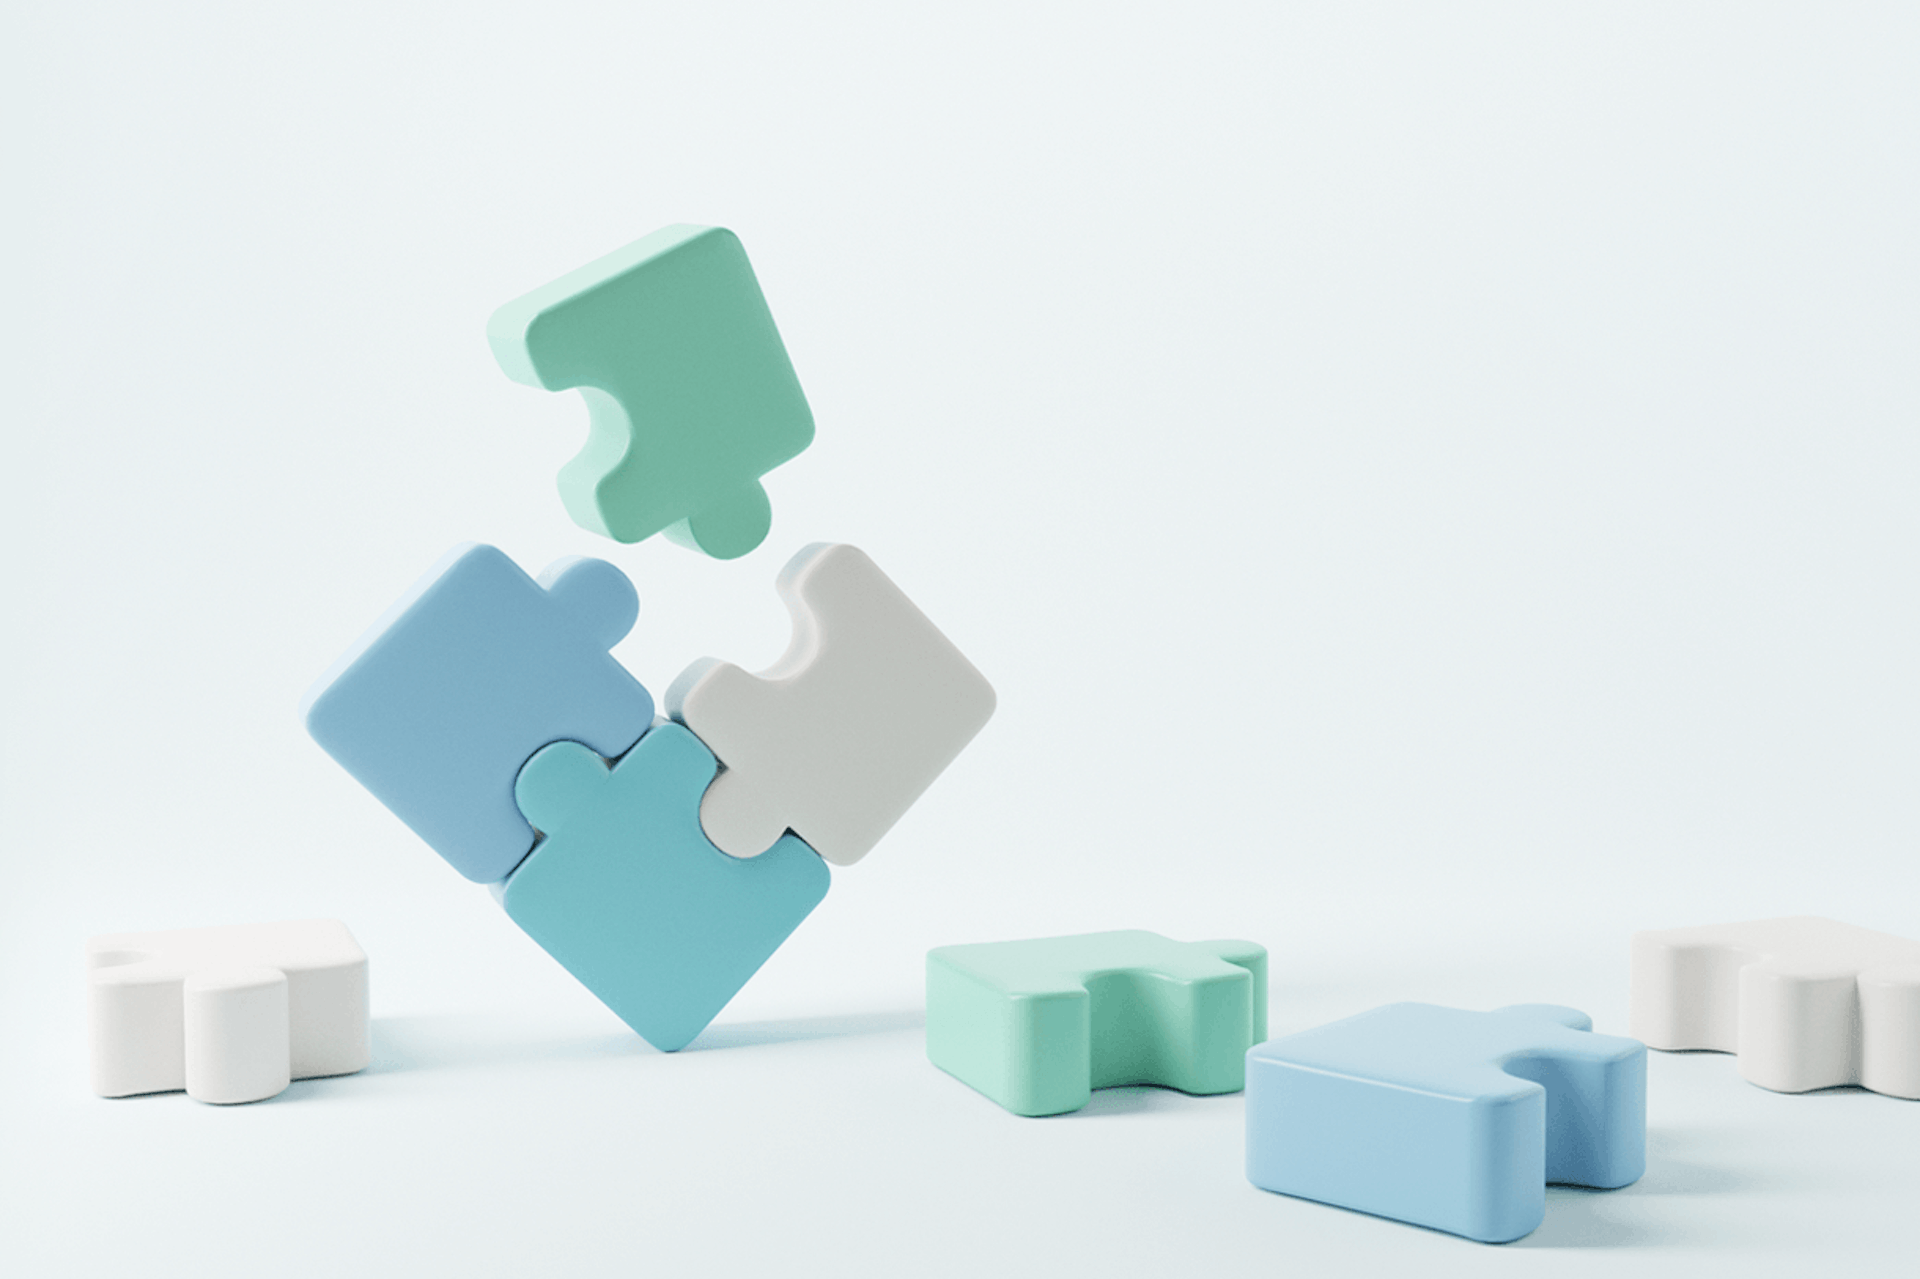 Illustration showing three puzzle pieces put together with a fourth puzzle piece about to be added to make a square. They are surrounded by other puzzle pieces on the ground. Essential roles on a modern marketing team blog post